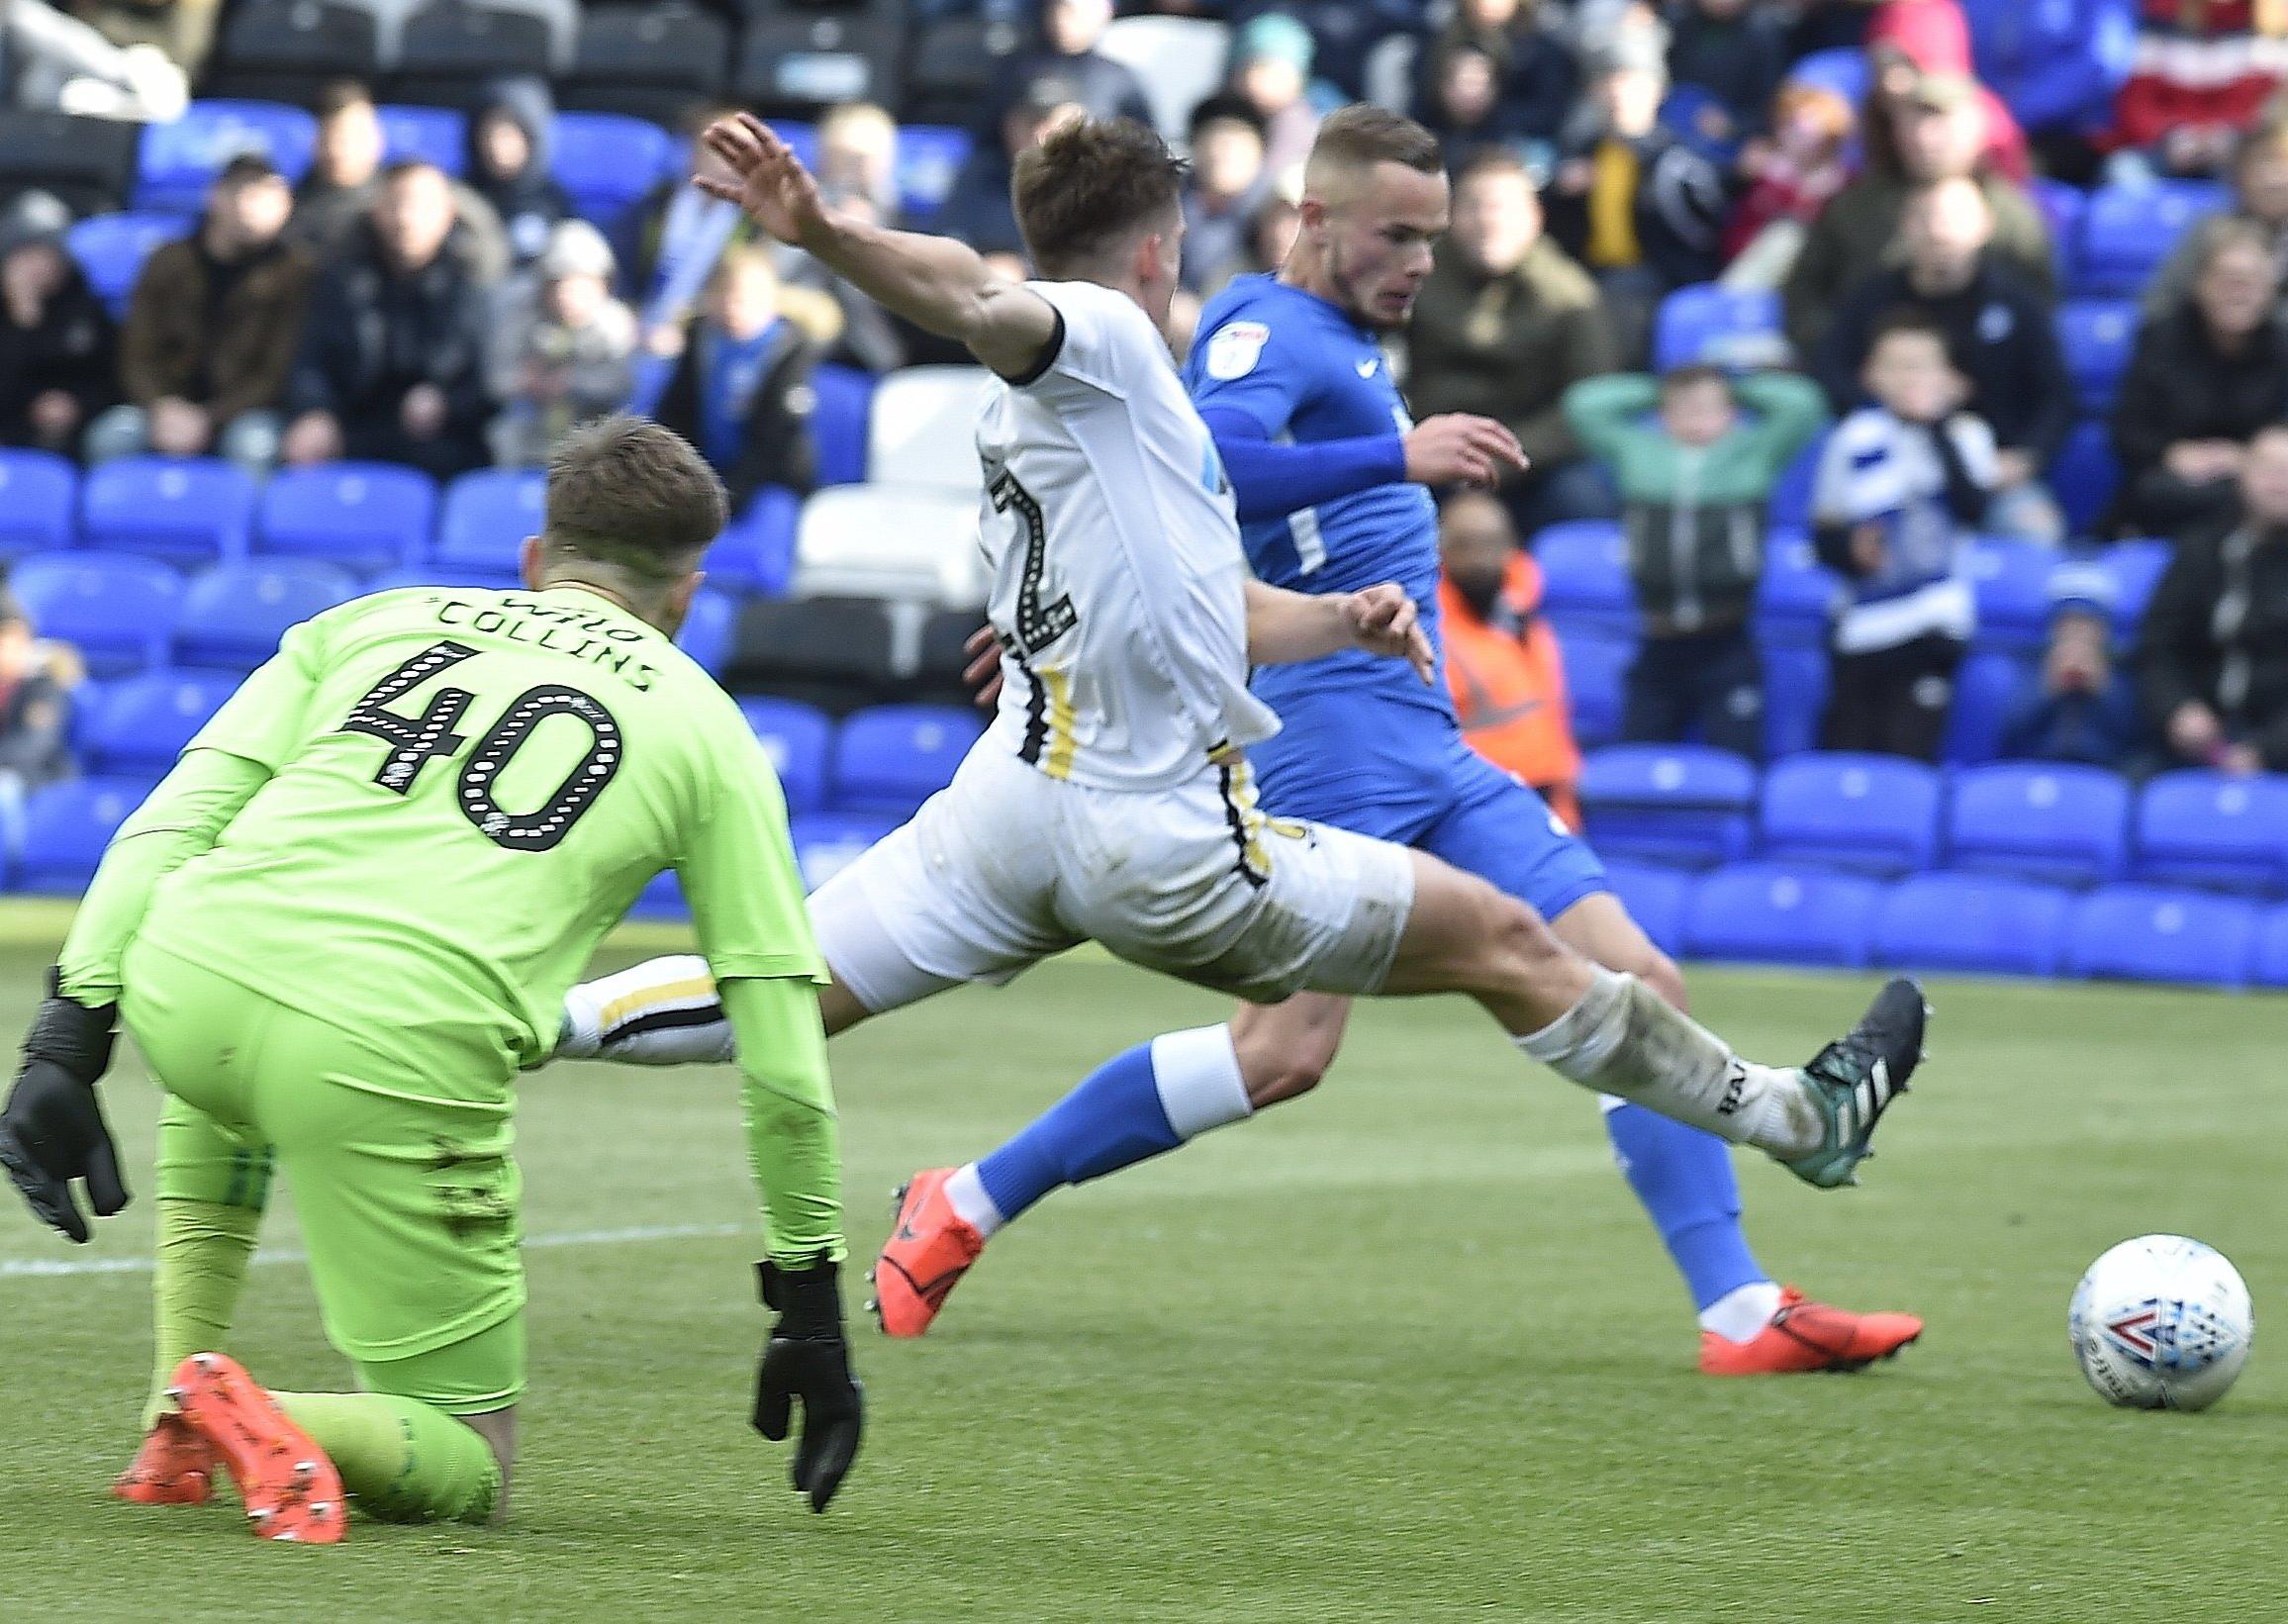 Posh played 55 games, winning 24, drawing 12, losing 19, scoring 84 goals and conceding 74. The final game of the 2018-19 season against Burton (right) was won, but Posh missed the play-offs by a point and a place.